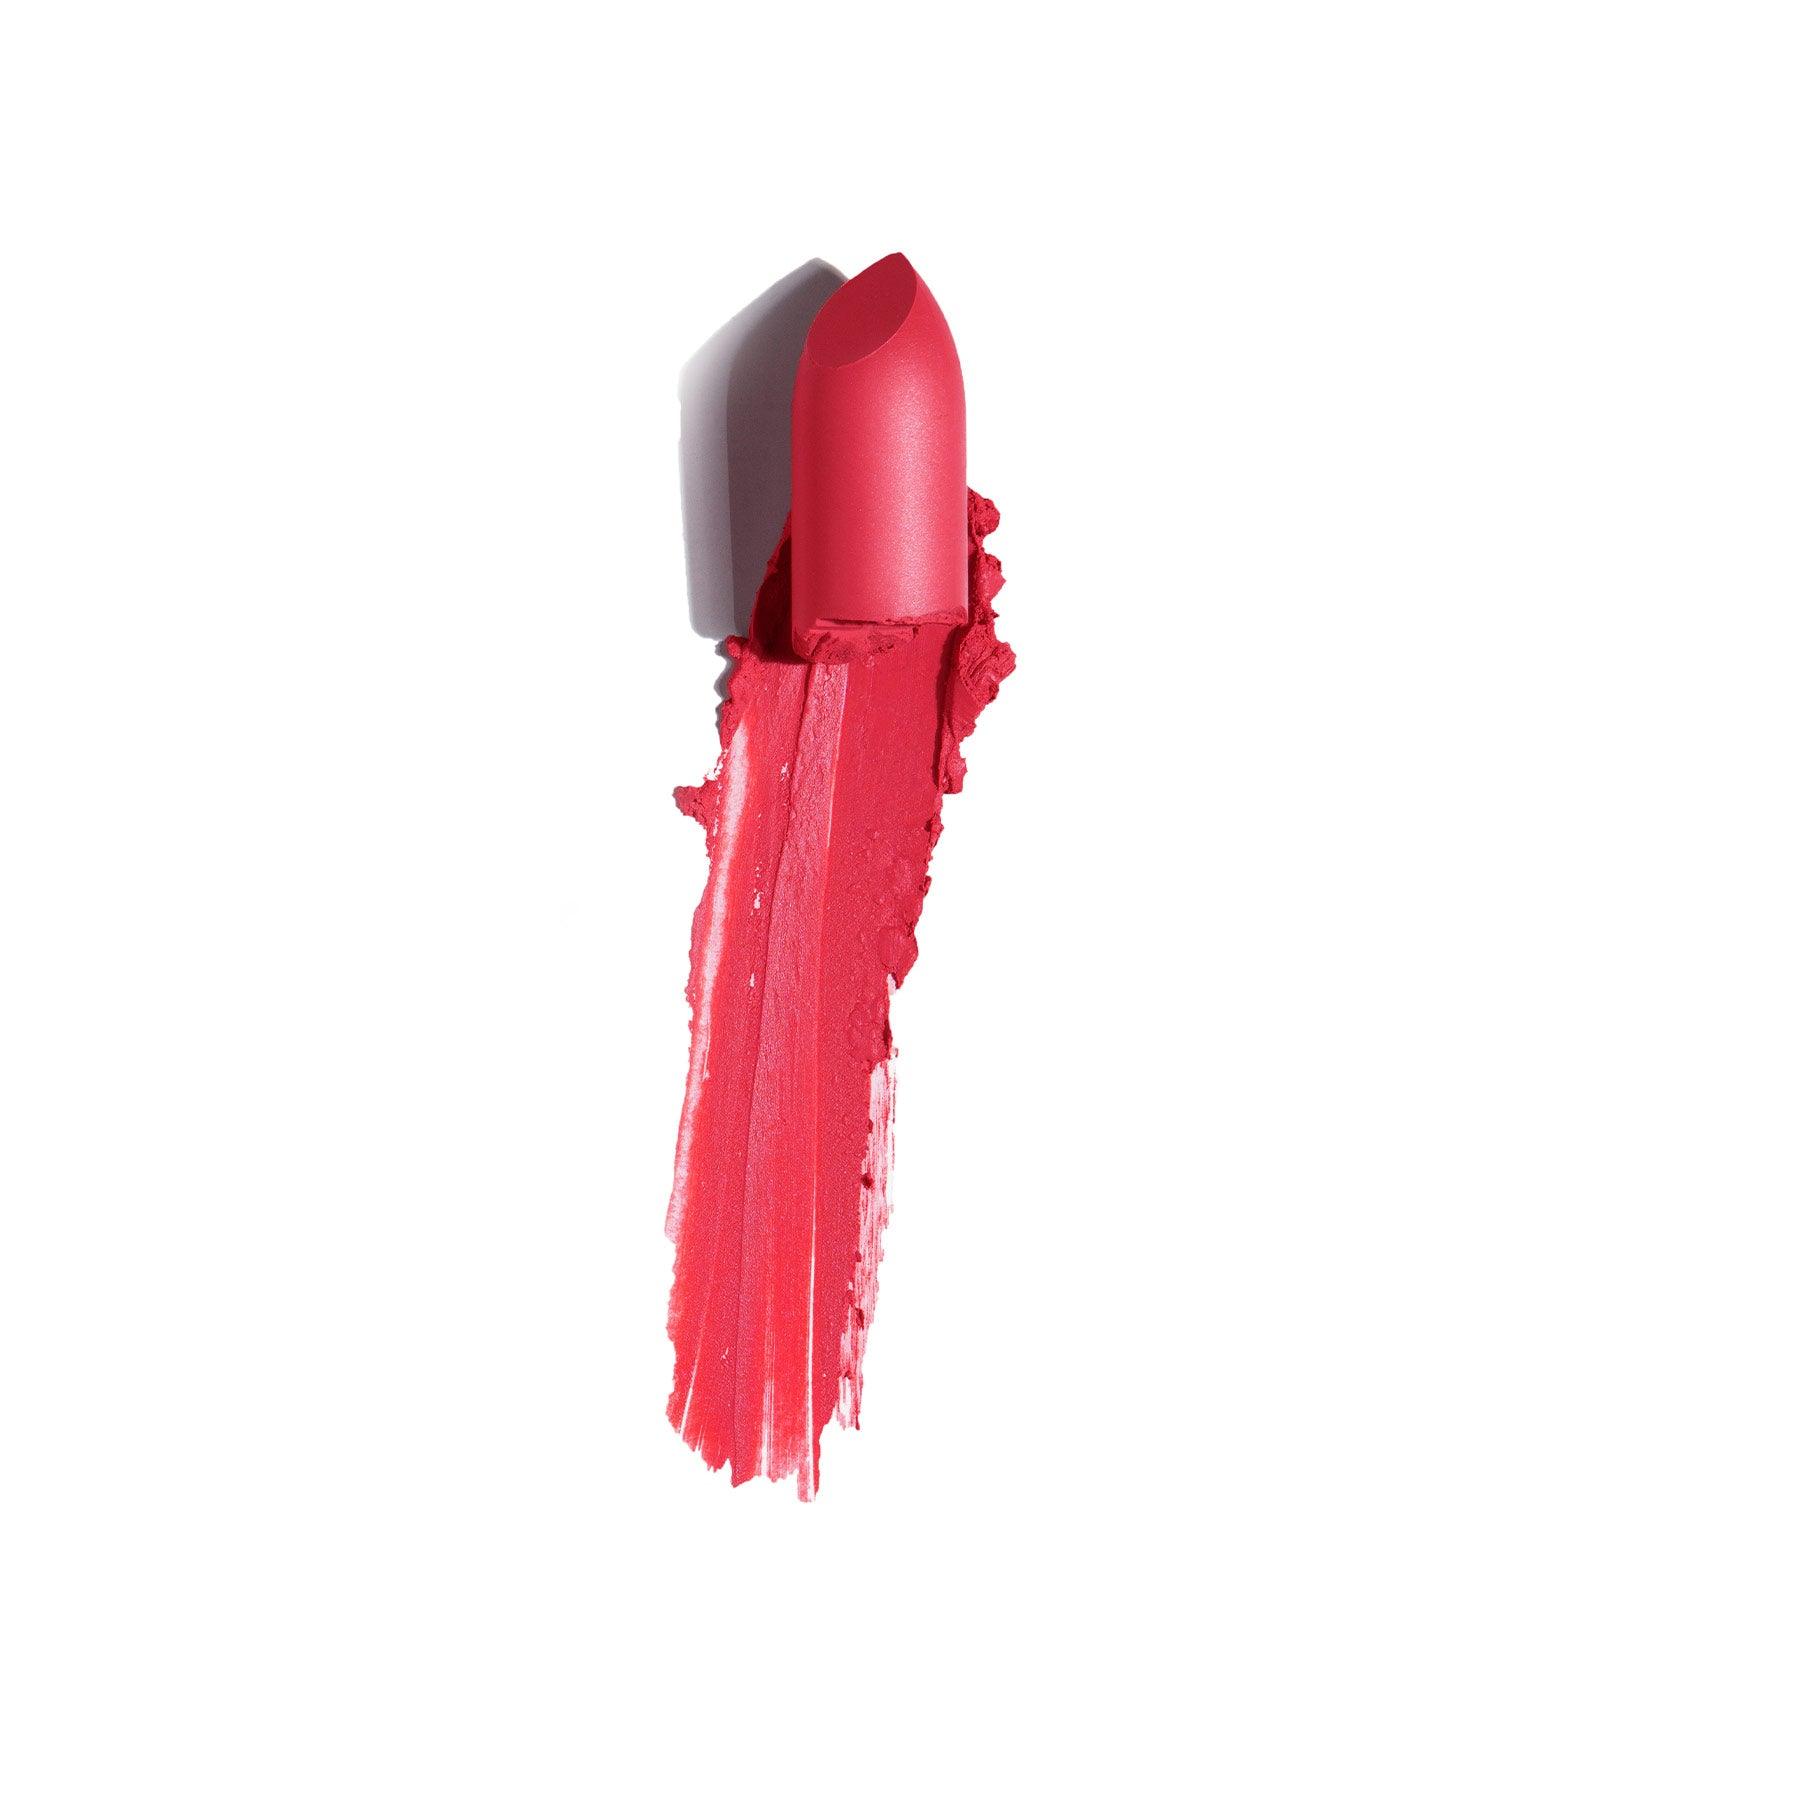 7 Covetable Coral Lipsticks That'll Make You Go Completely Crazy